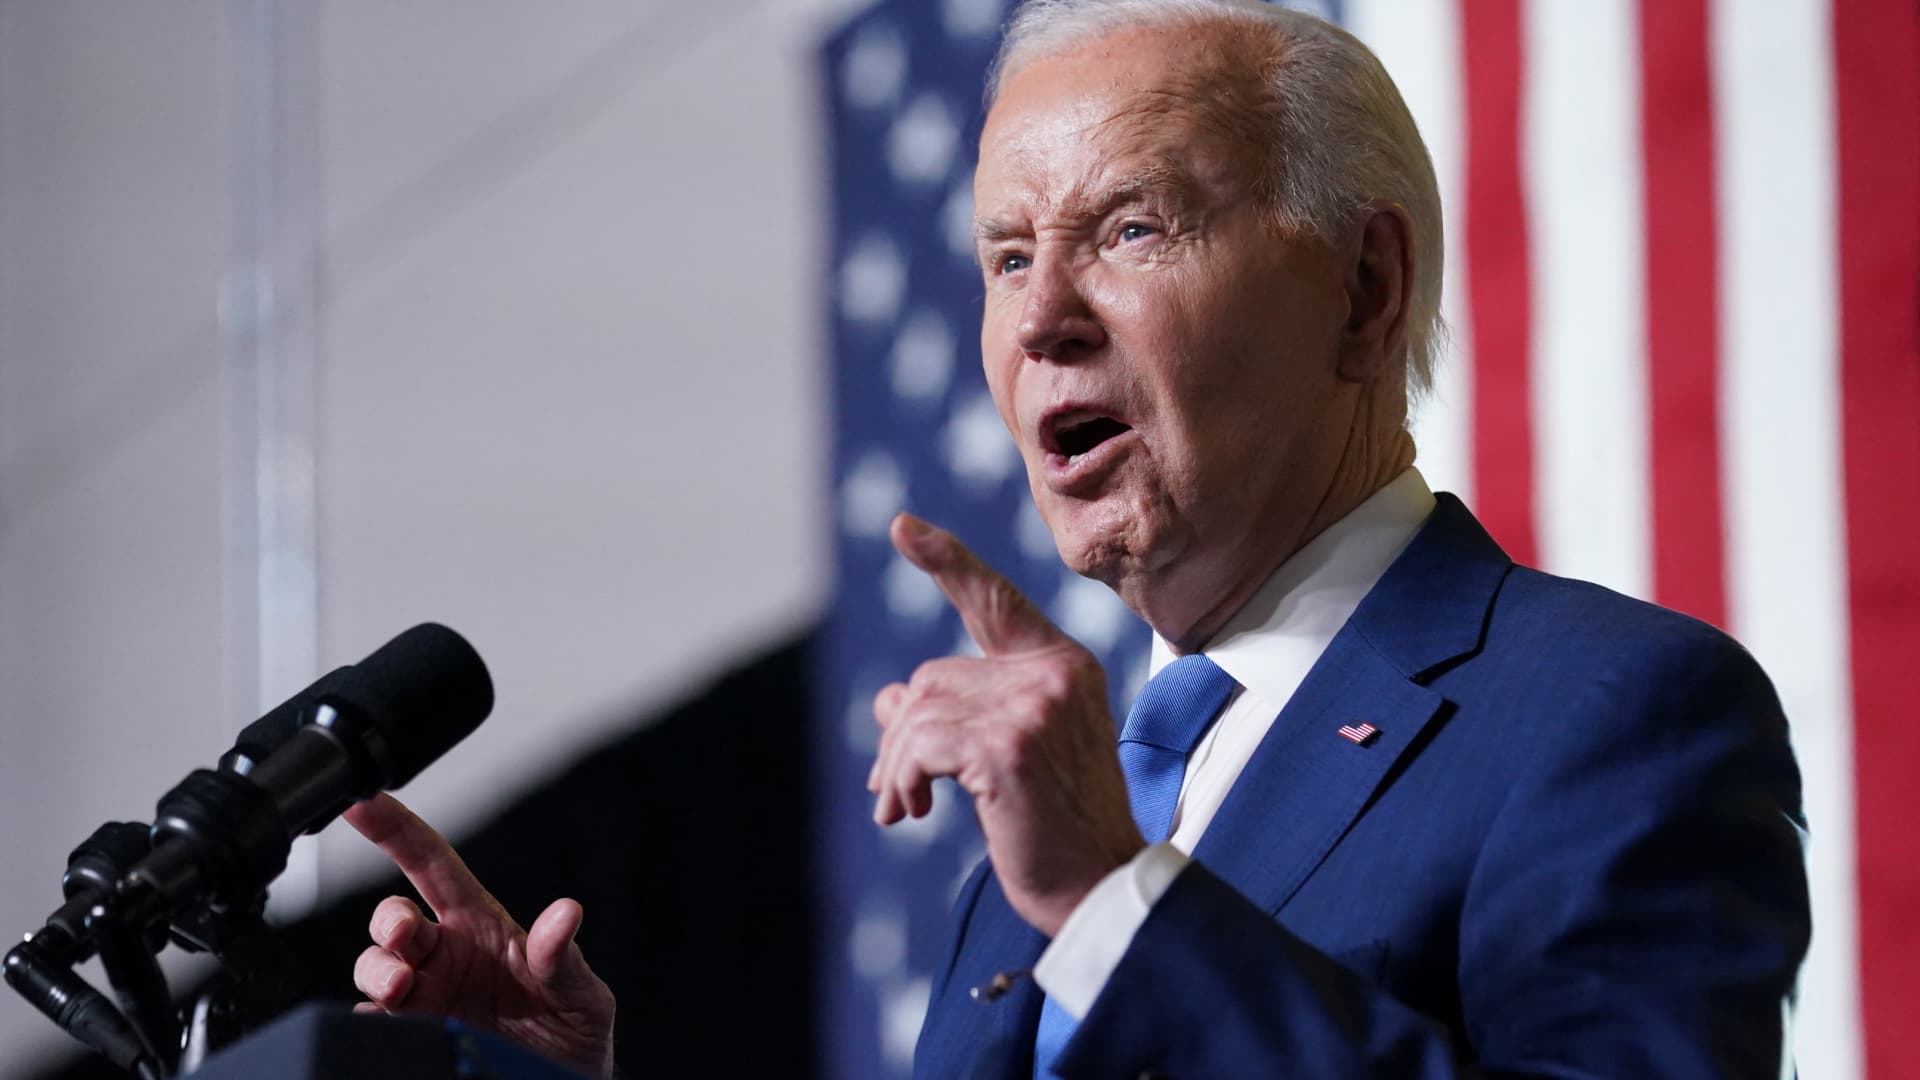 Biden says U.S. won’t supply weapons for Israel to attack